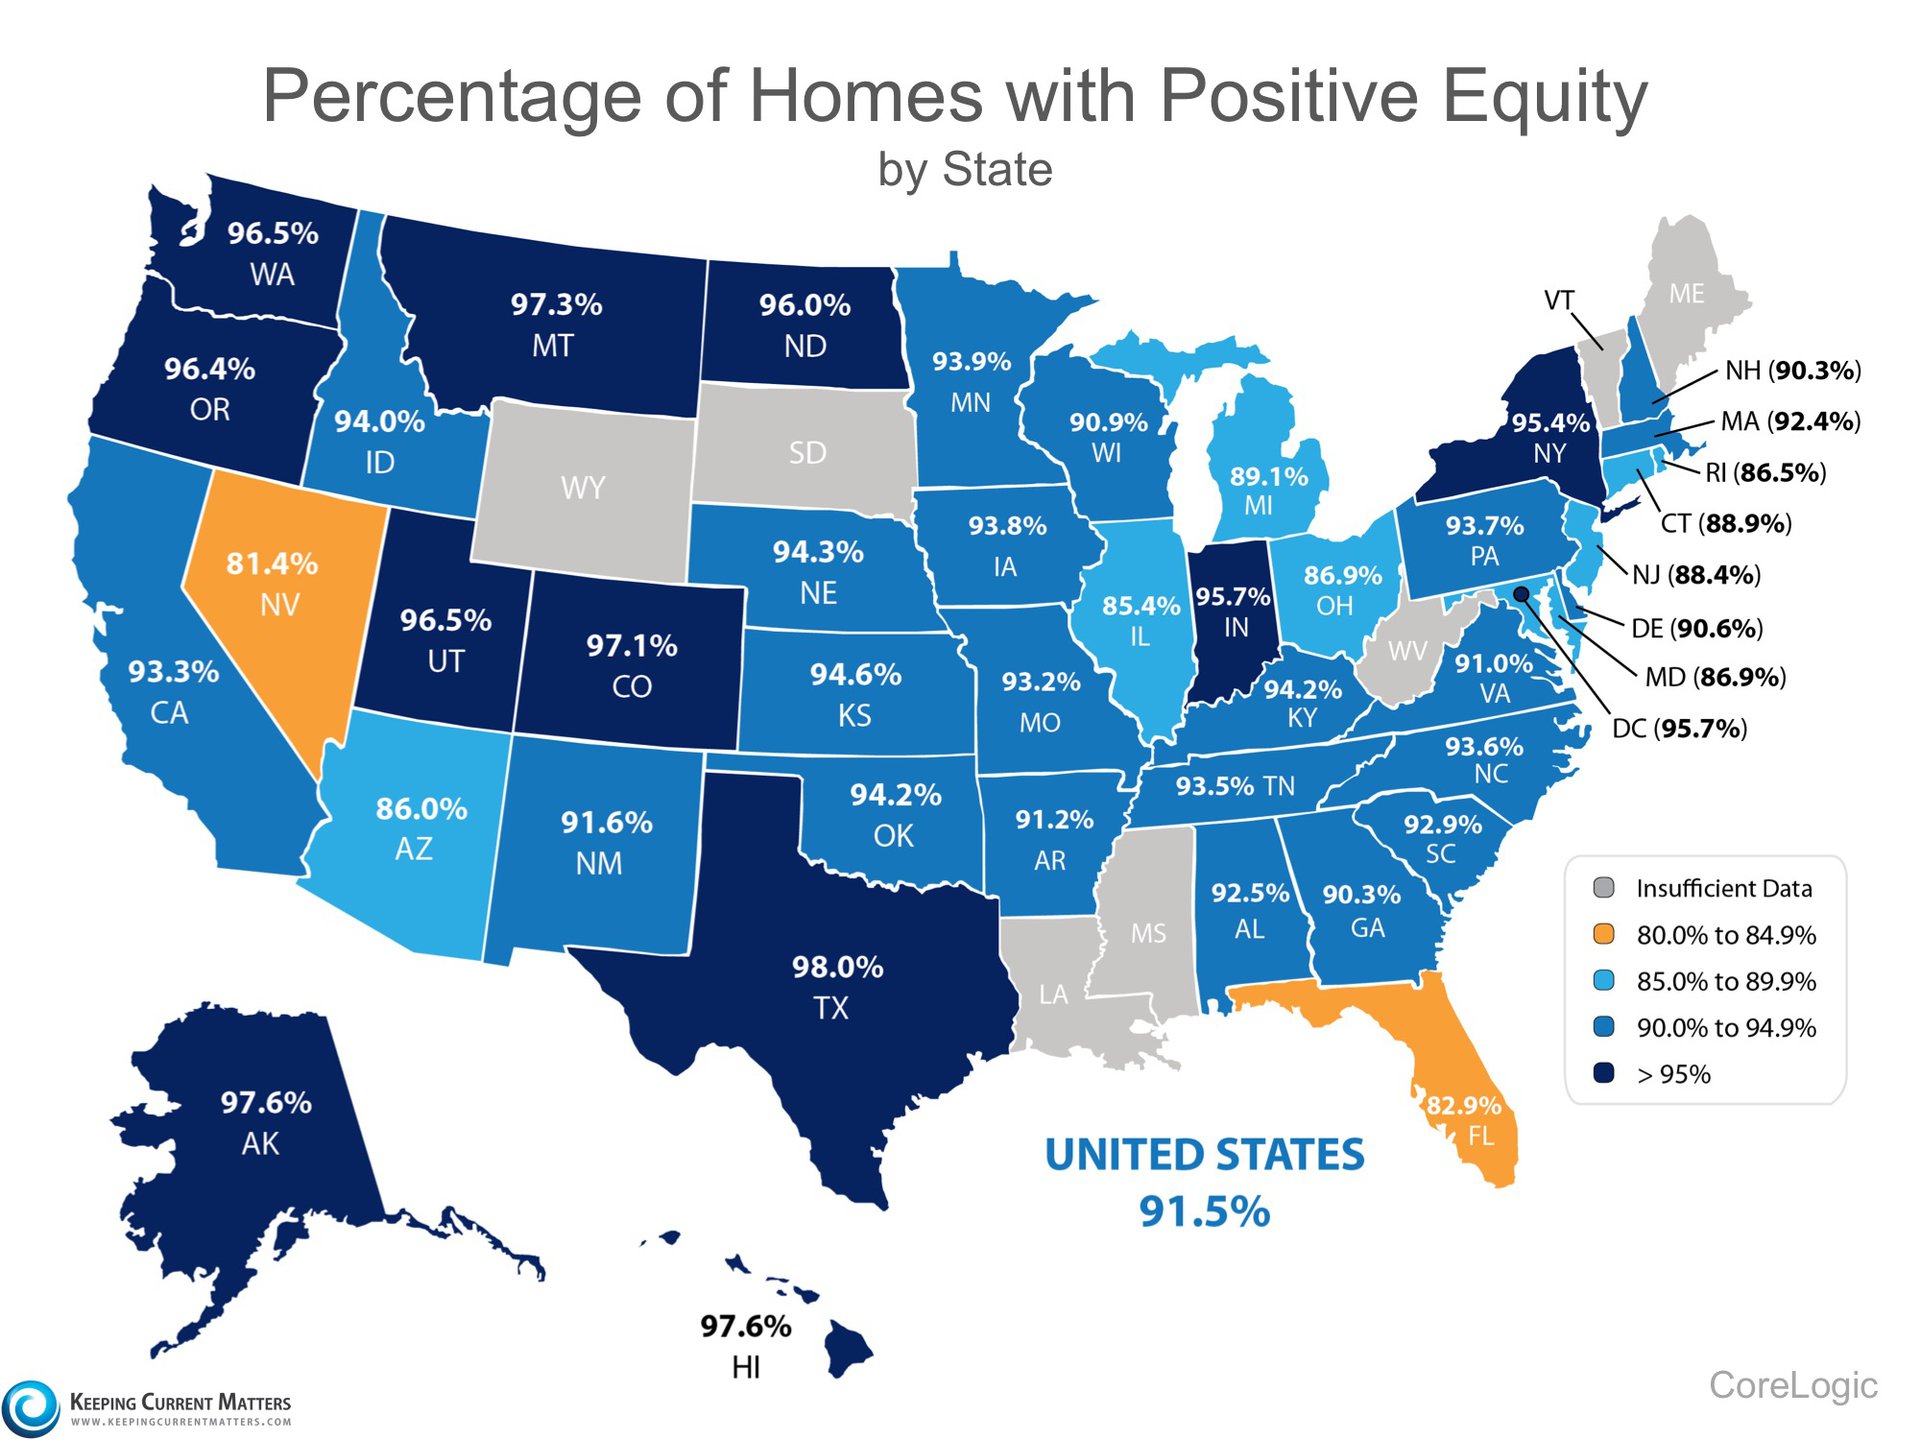 91.5% of Homes in the US have Positive Equity | Keeping Current Matters